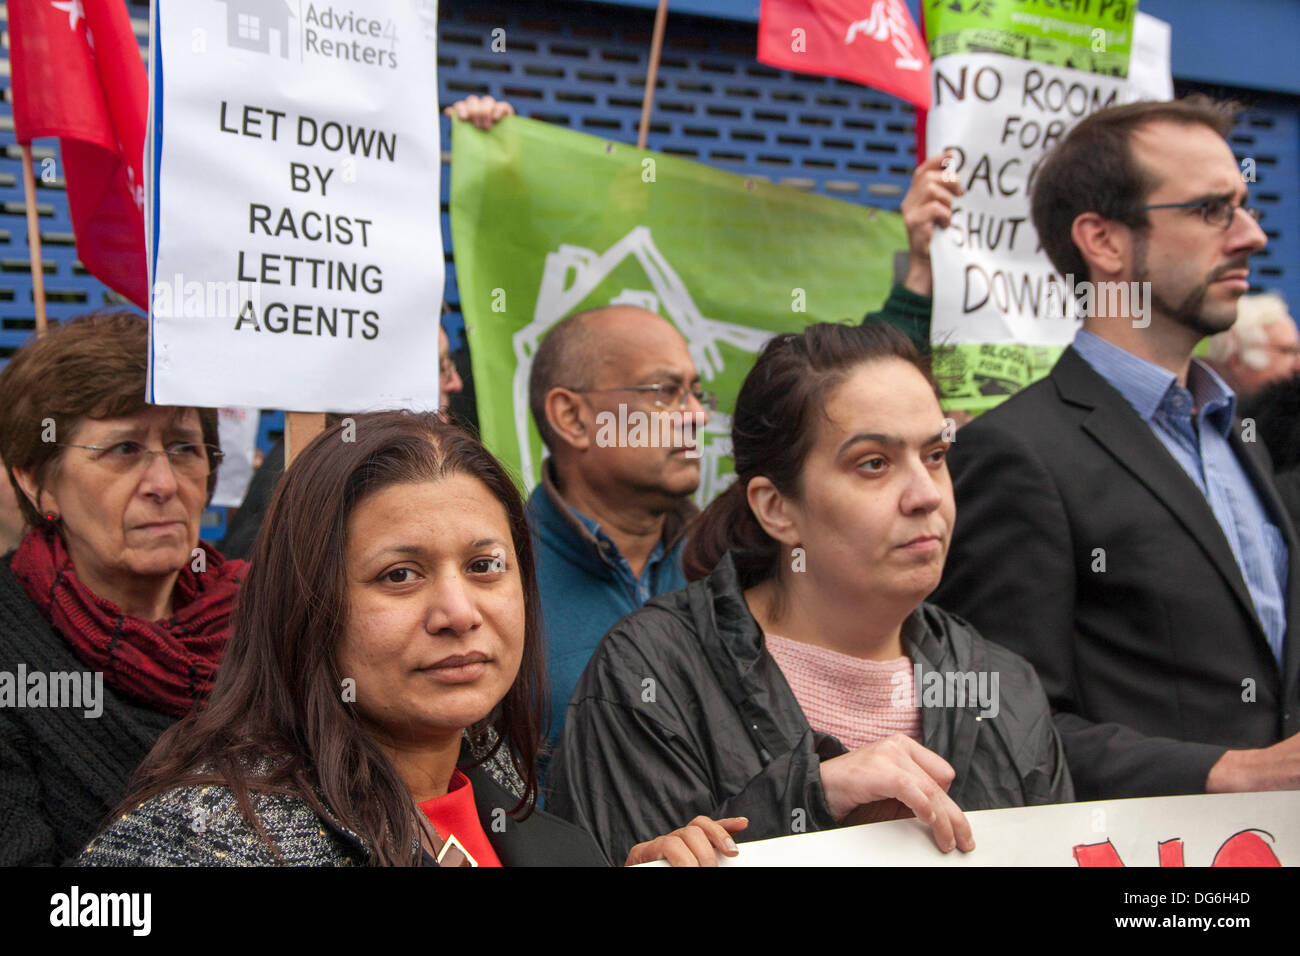 London, UK. 15th October 2013. Anti-racism campaigners demonstrate outside A to Z Property Services in Willesden Green, North London, after they were found to have denied rental properties to Afro-Caribbean homeseekers. Credit:  Paul Davey/Alamy Live News Stock Photo